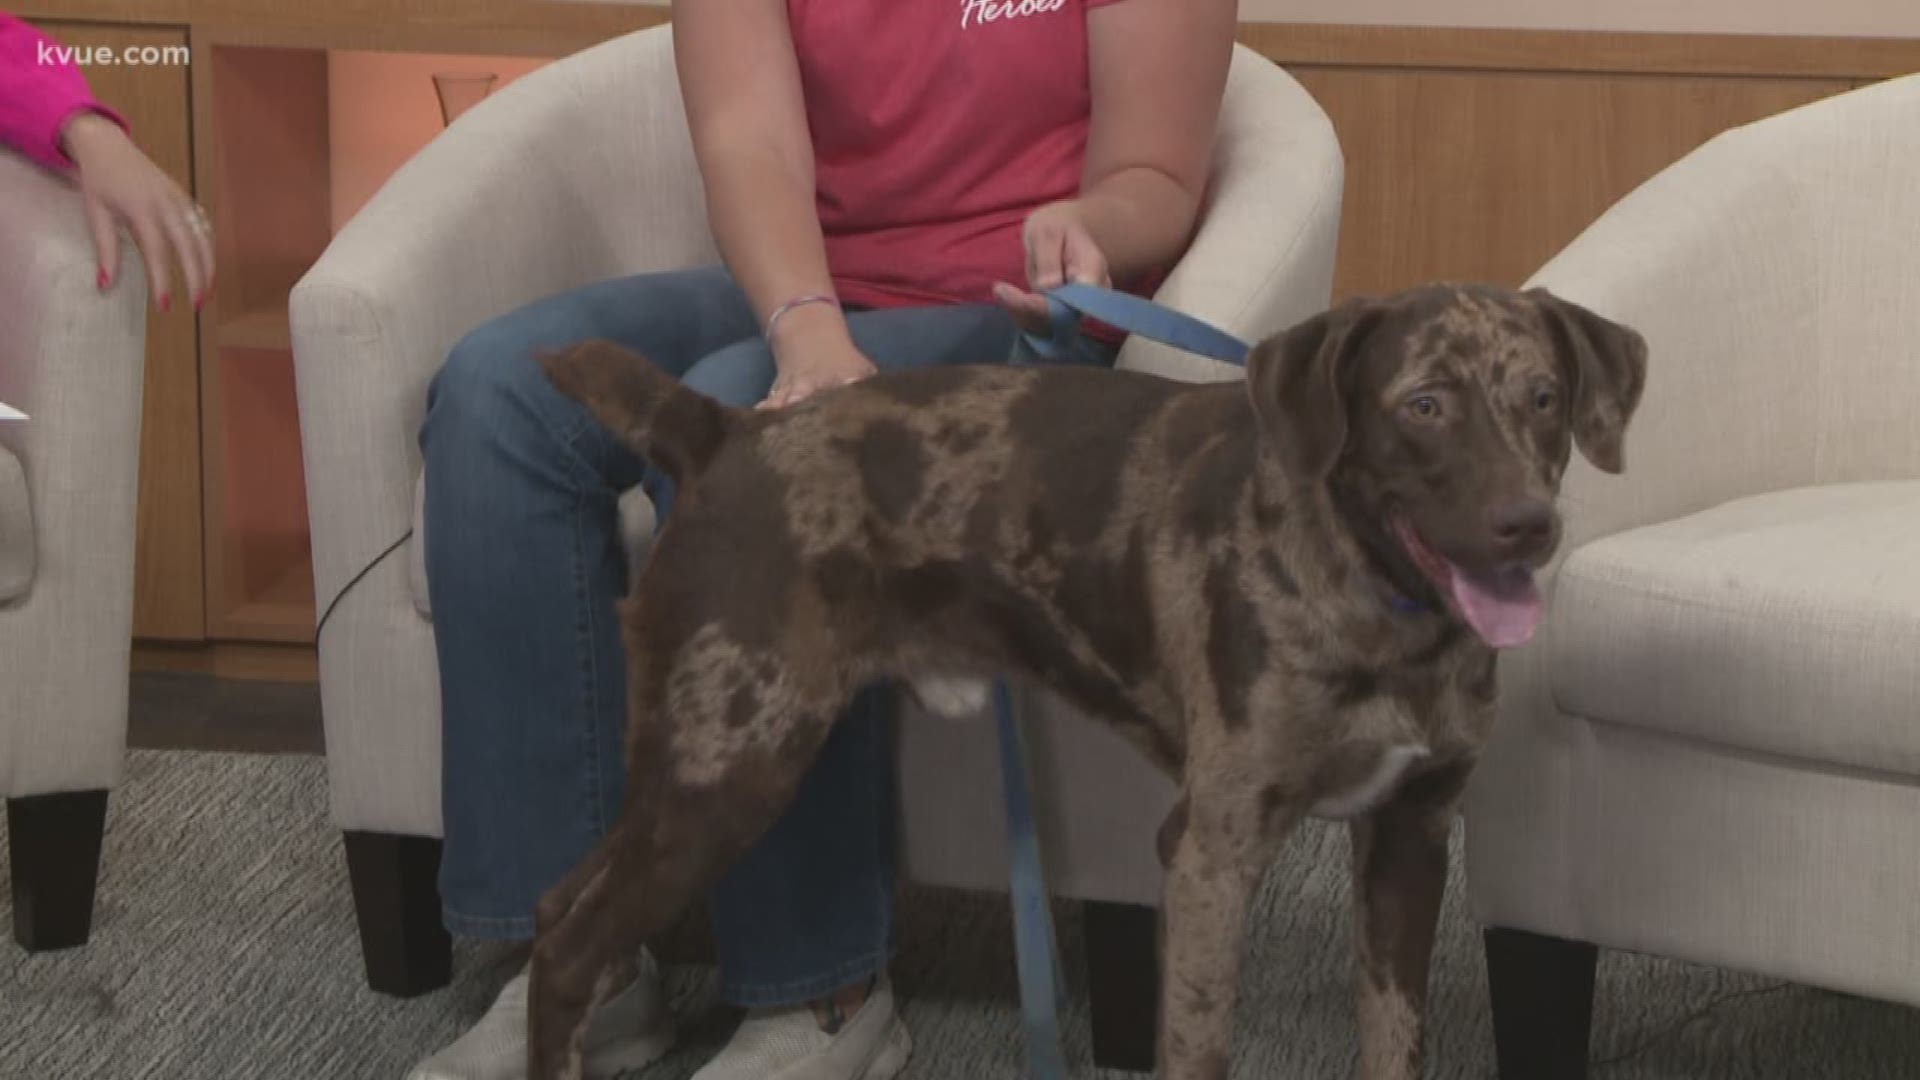 Joining us this morning is Christine Rankin with Texas Humane Heroes, and she's brought along CoCo today.